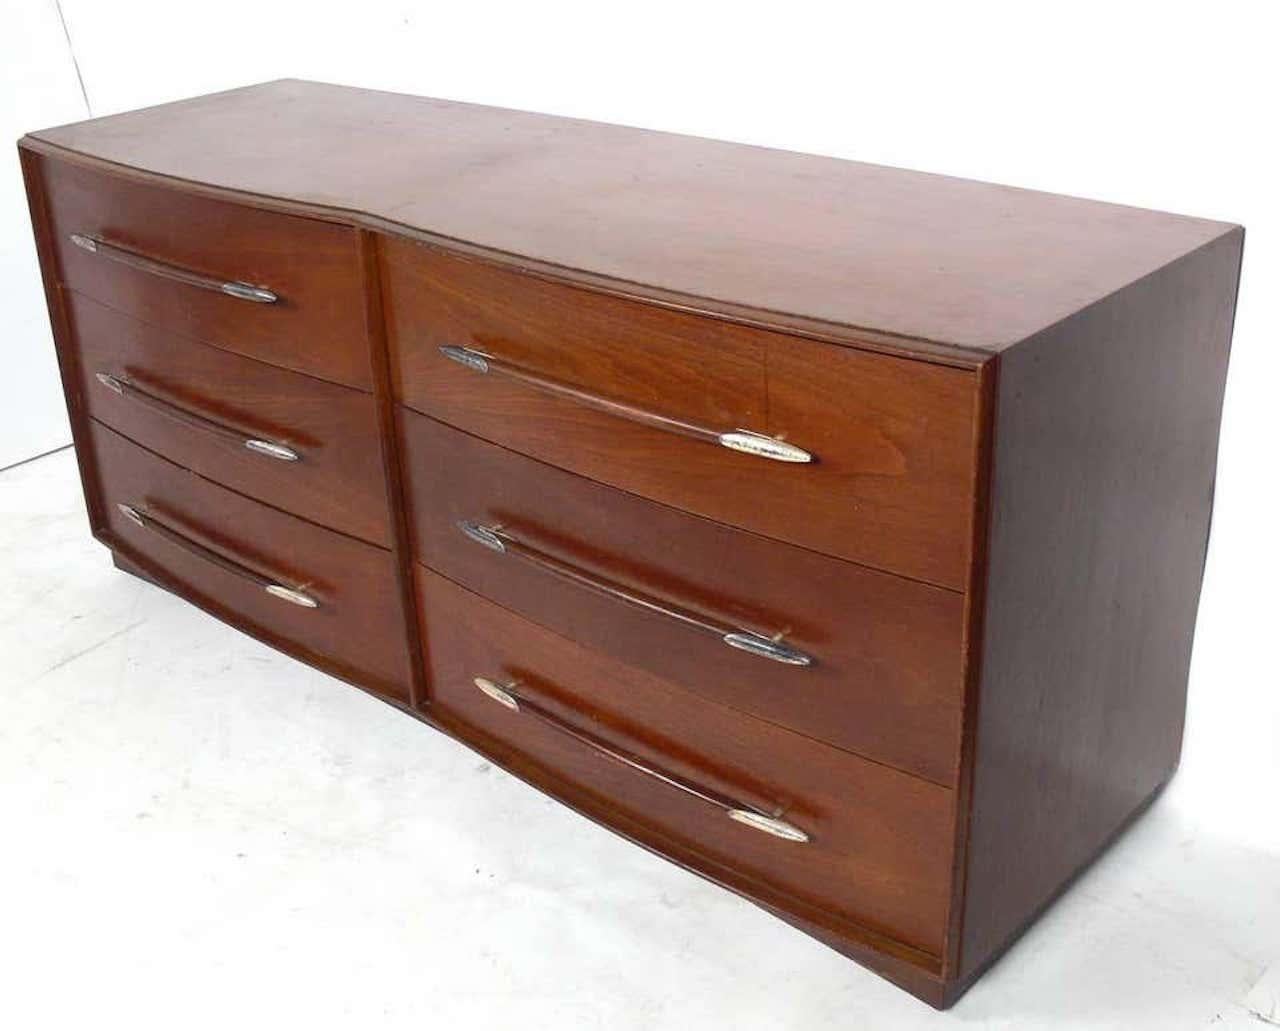 Midcentury 6-drawer double bowed front walnut dresser with stylized spear handles tipped in polished nickel points.